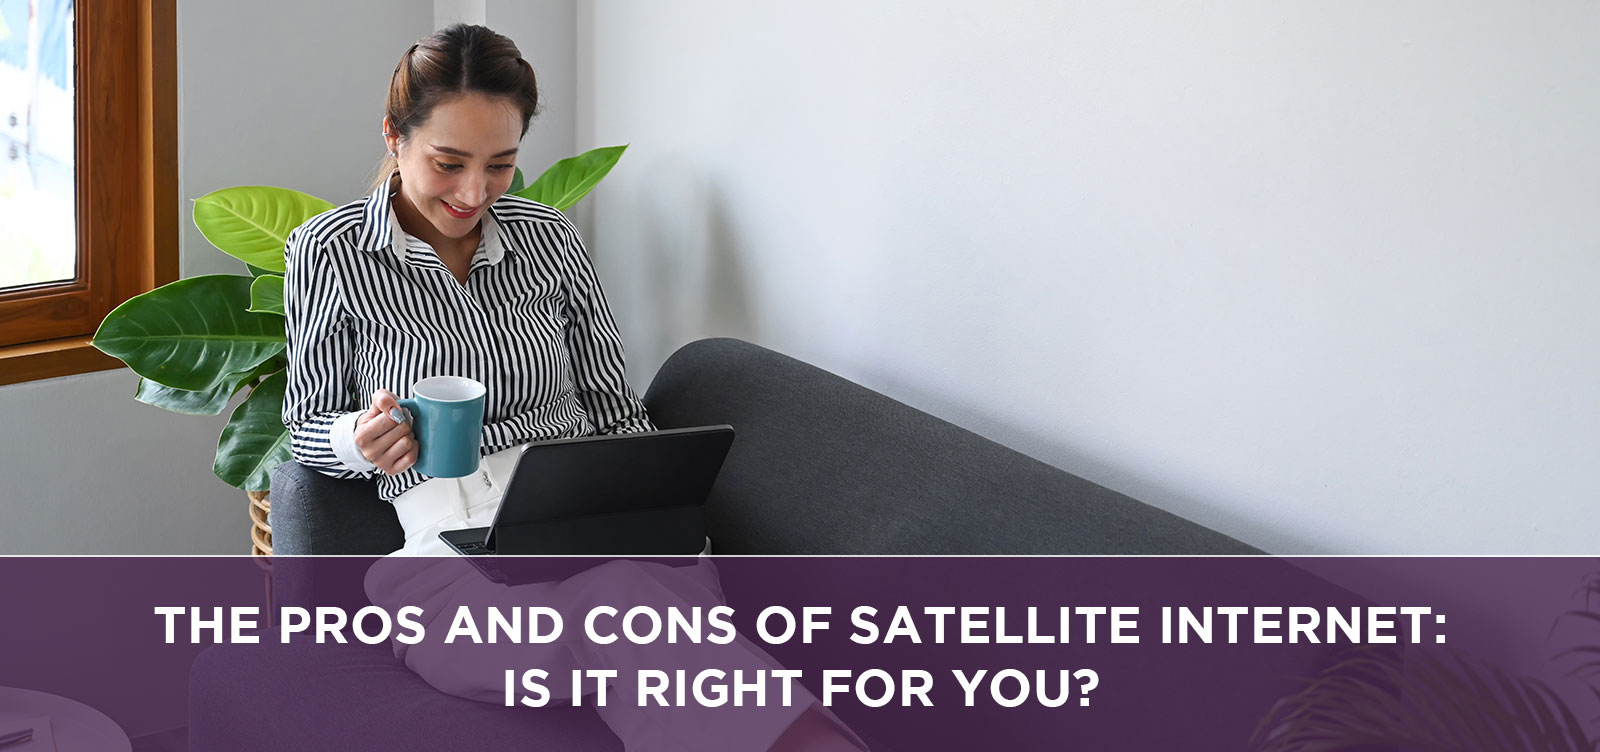 The Pros and Cons of Satellite Internet: Is It Right for You?